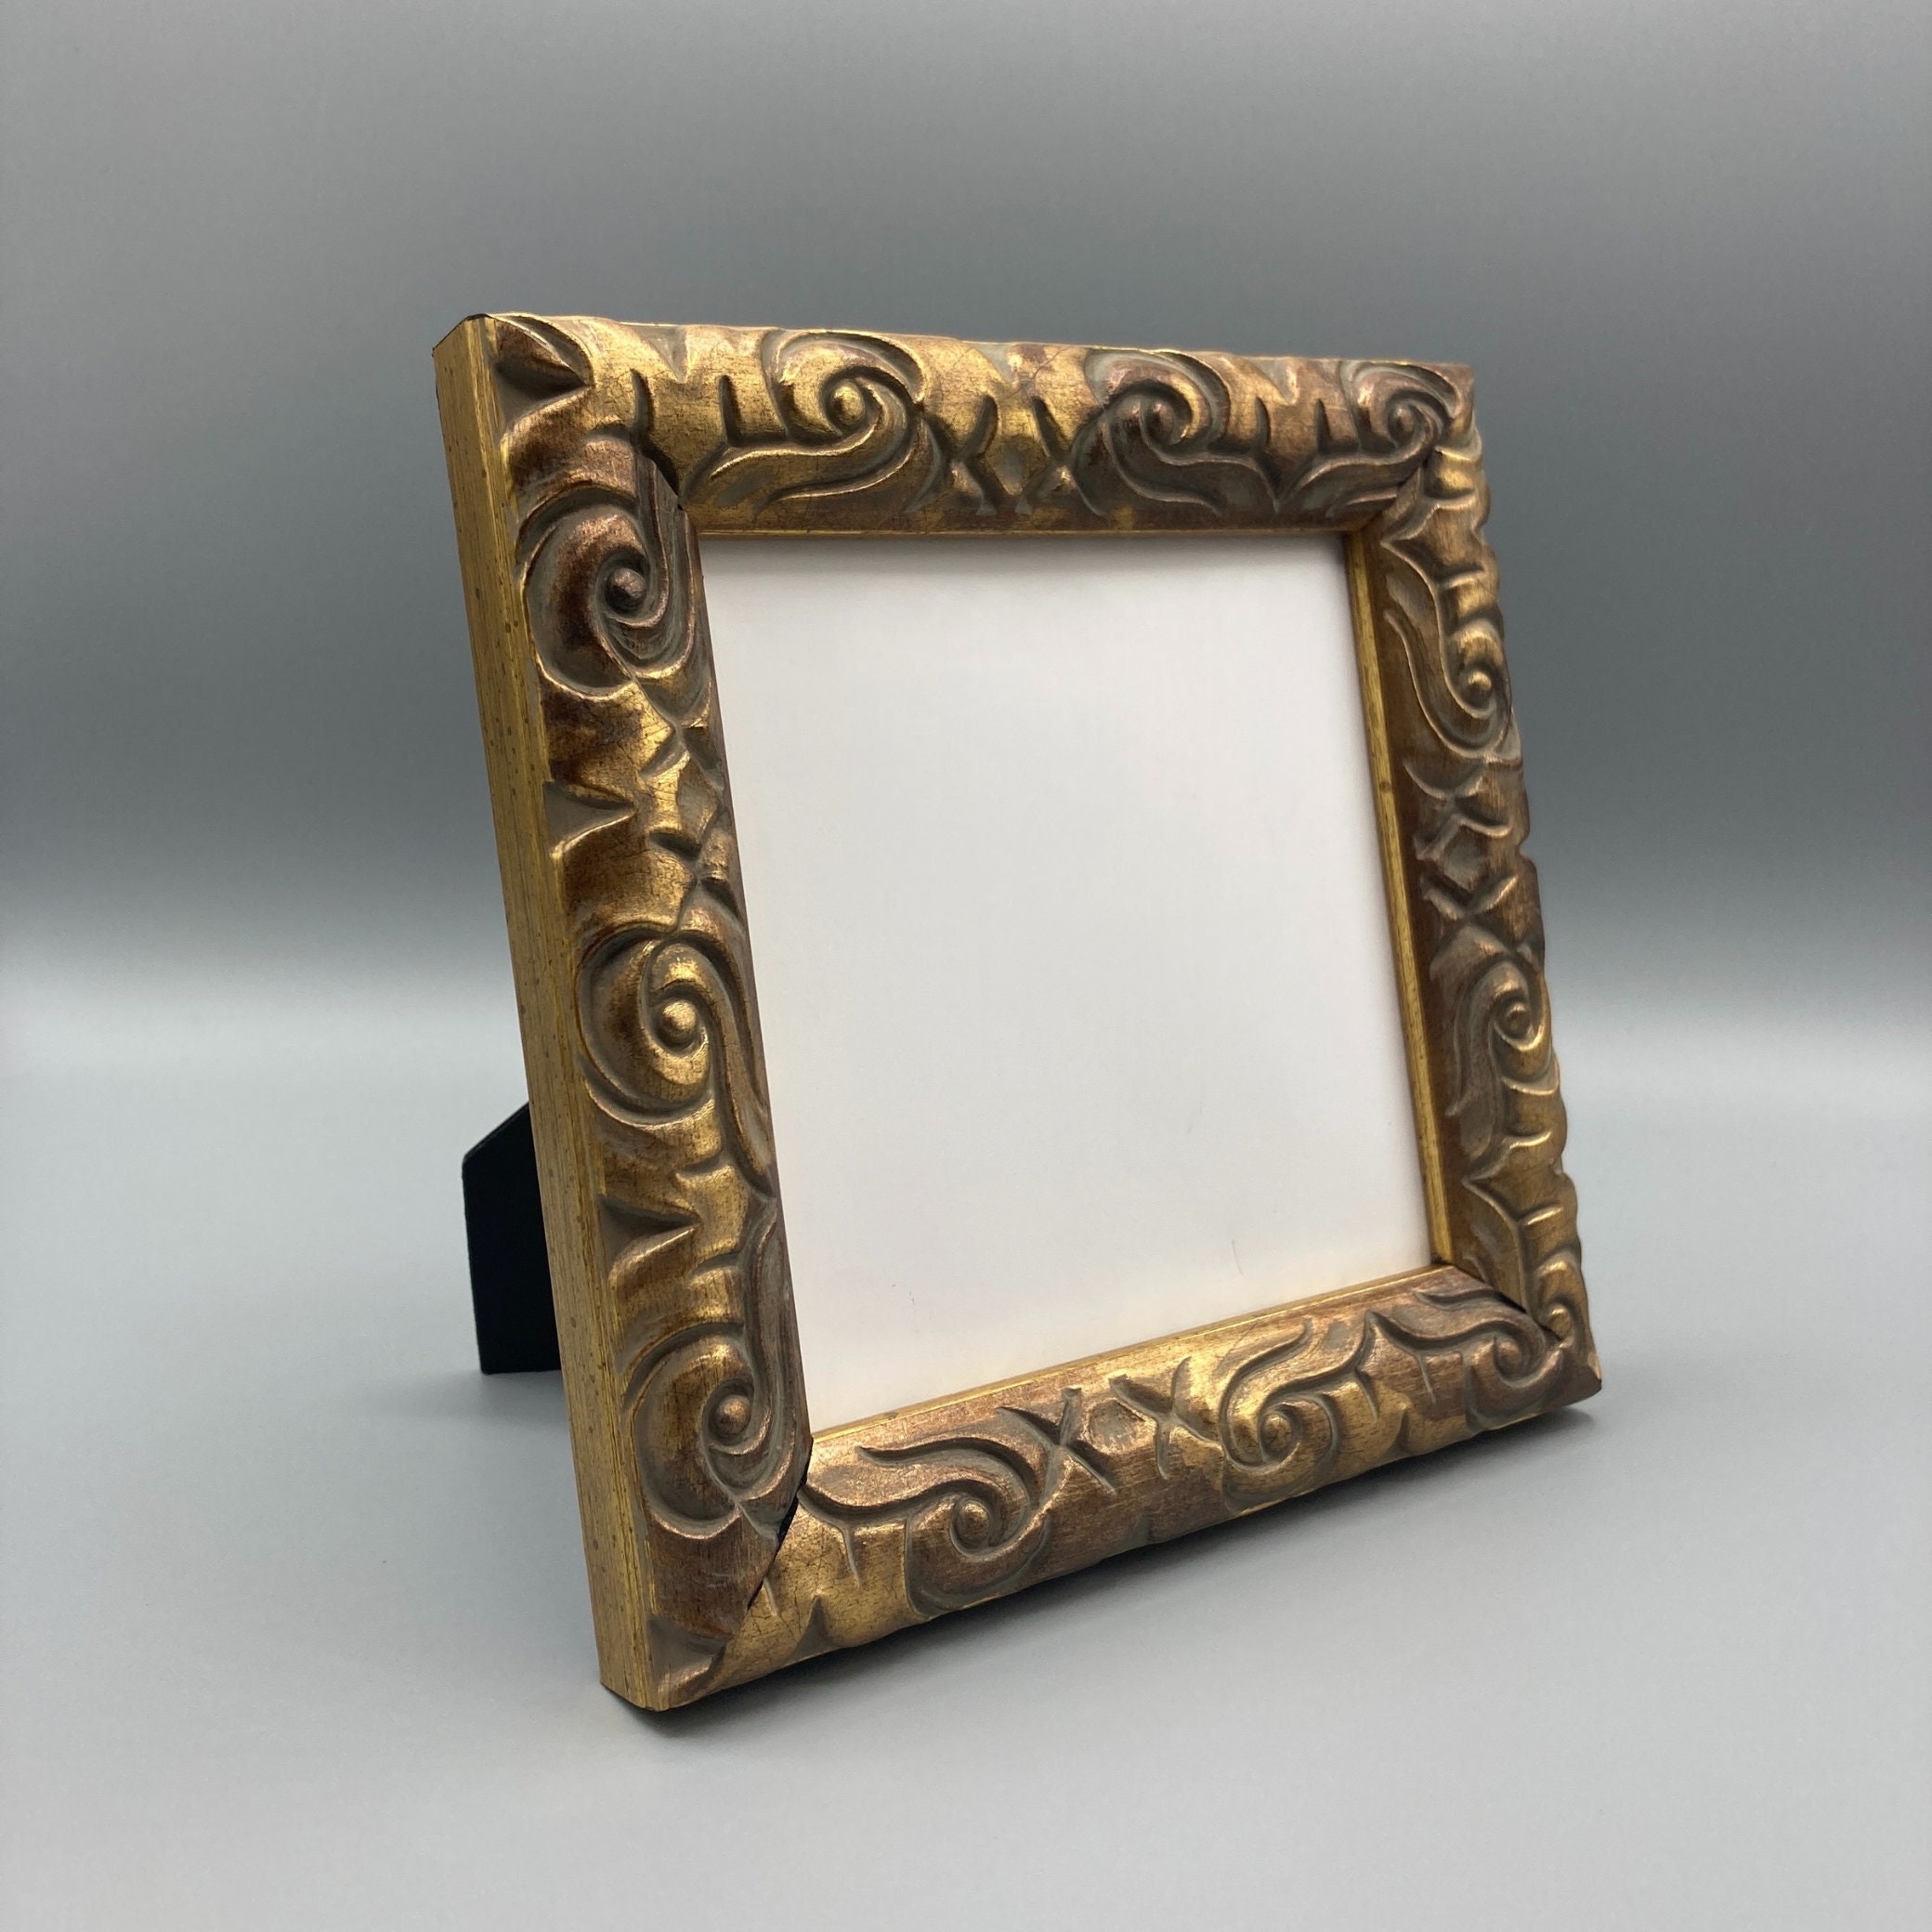 GOLD Plate Float 5x5/4x4 Frame - Picture Frames, Photo Albums, Personalized  and Engraved Digital Photo Gifts - SendAFrame